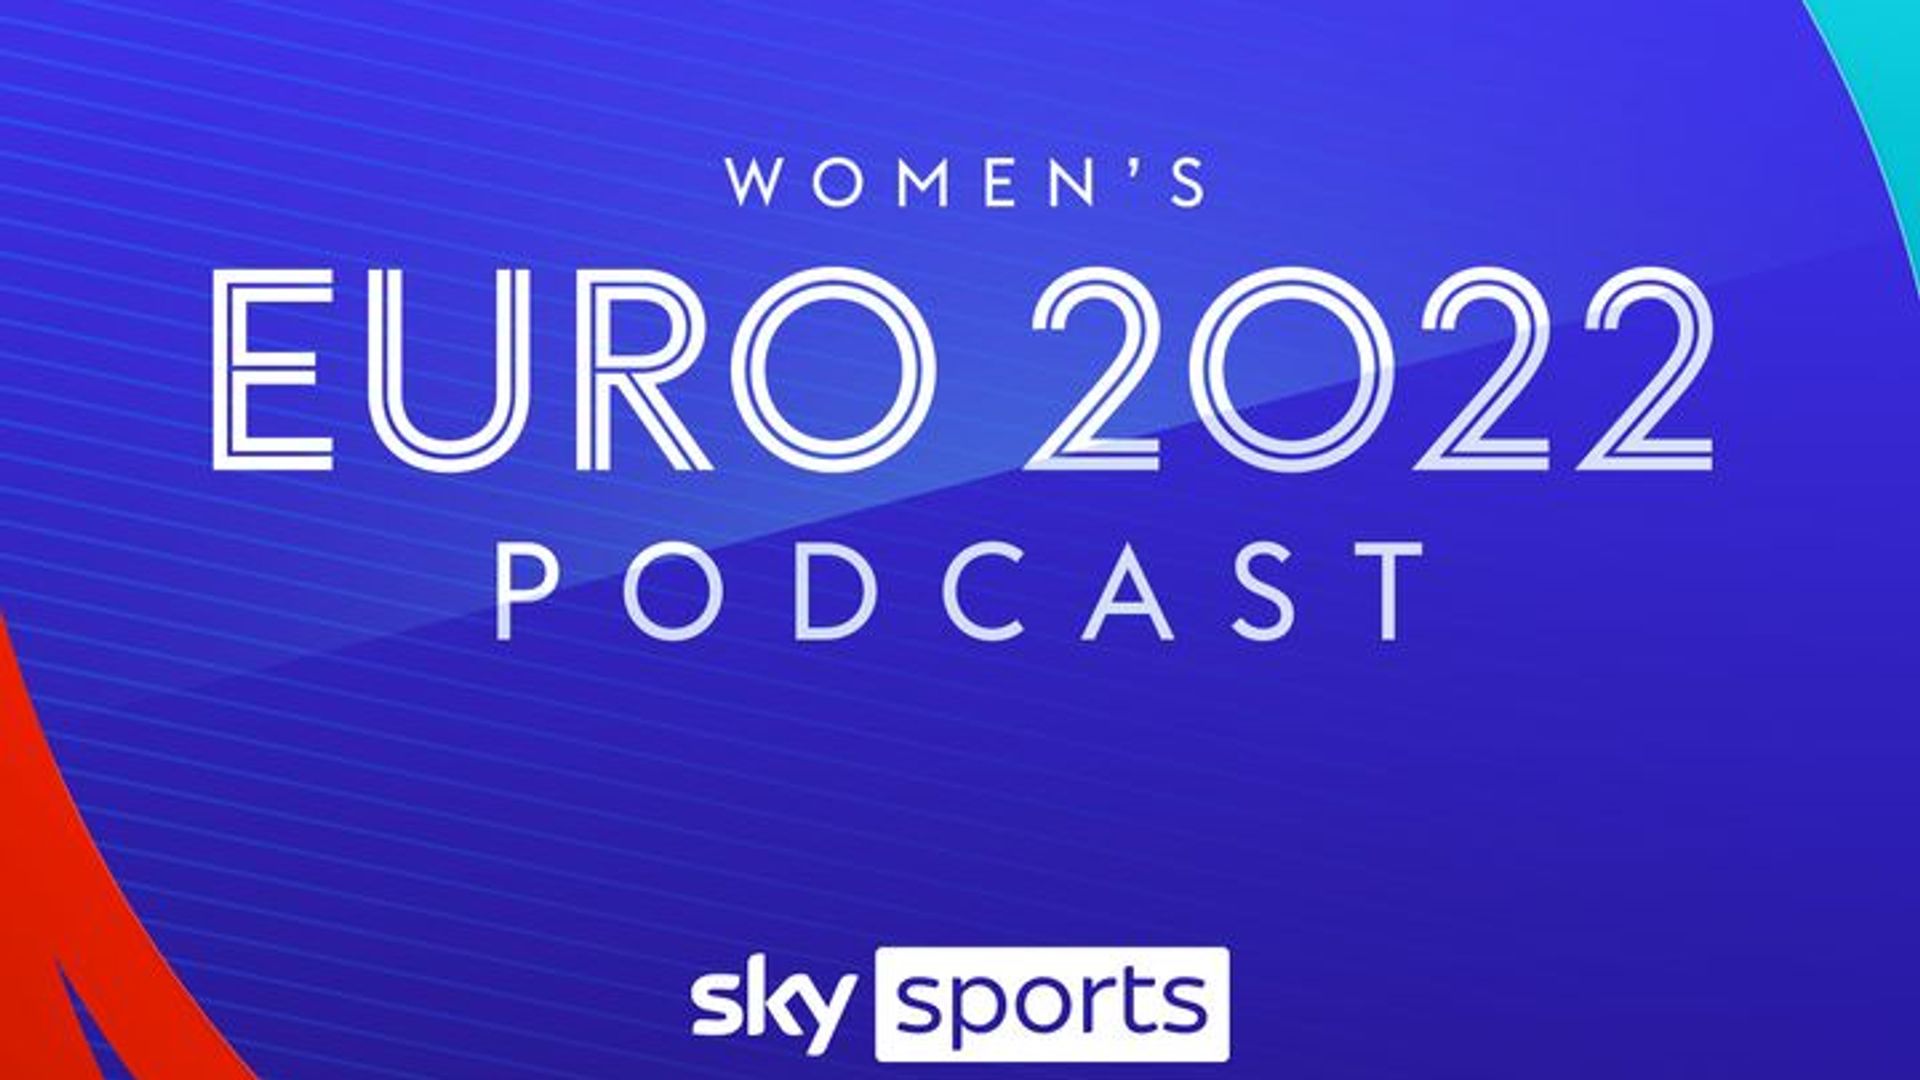 Listen and subscribe to the Sky Sports Women's Euros podcast